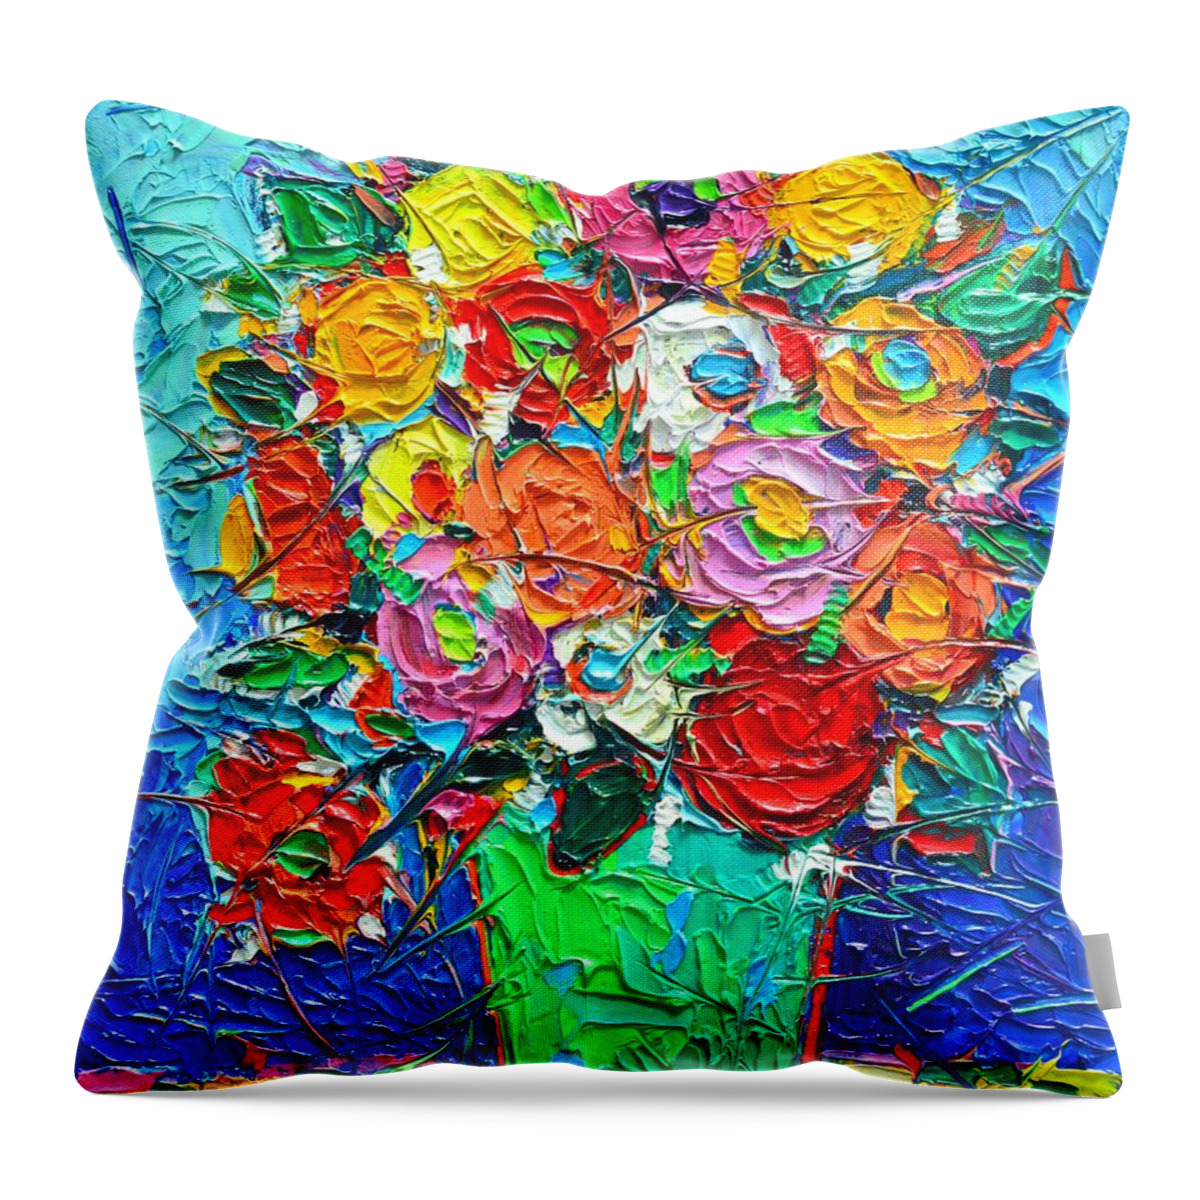 Abstract Throw Pillow featuring the painting Colorful Wildflowers Abstract Modern Impressionist Palette Knife Oil Painting By Ana Maria Edulescu by Ana Maria Edulescu